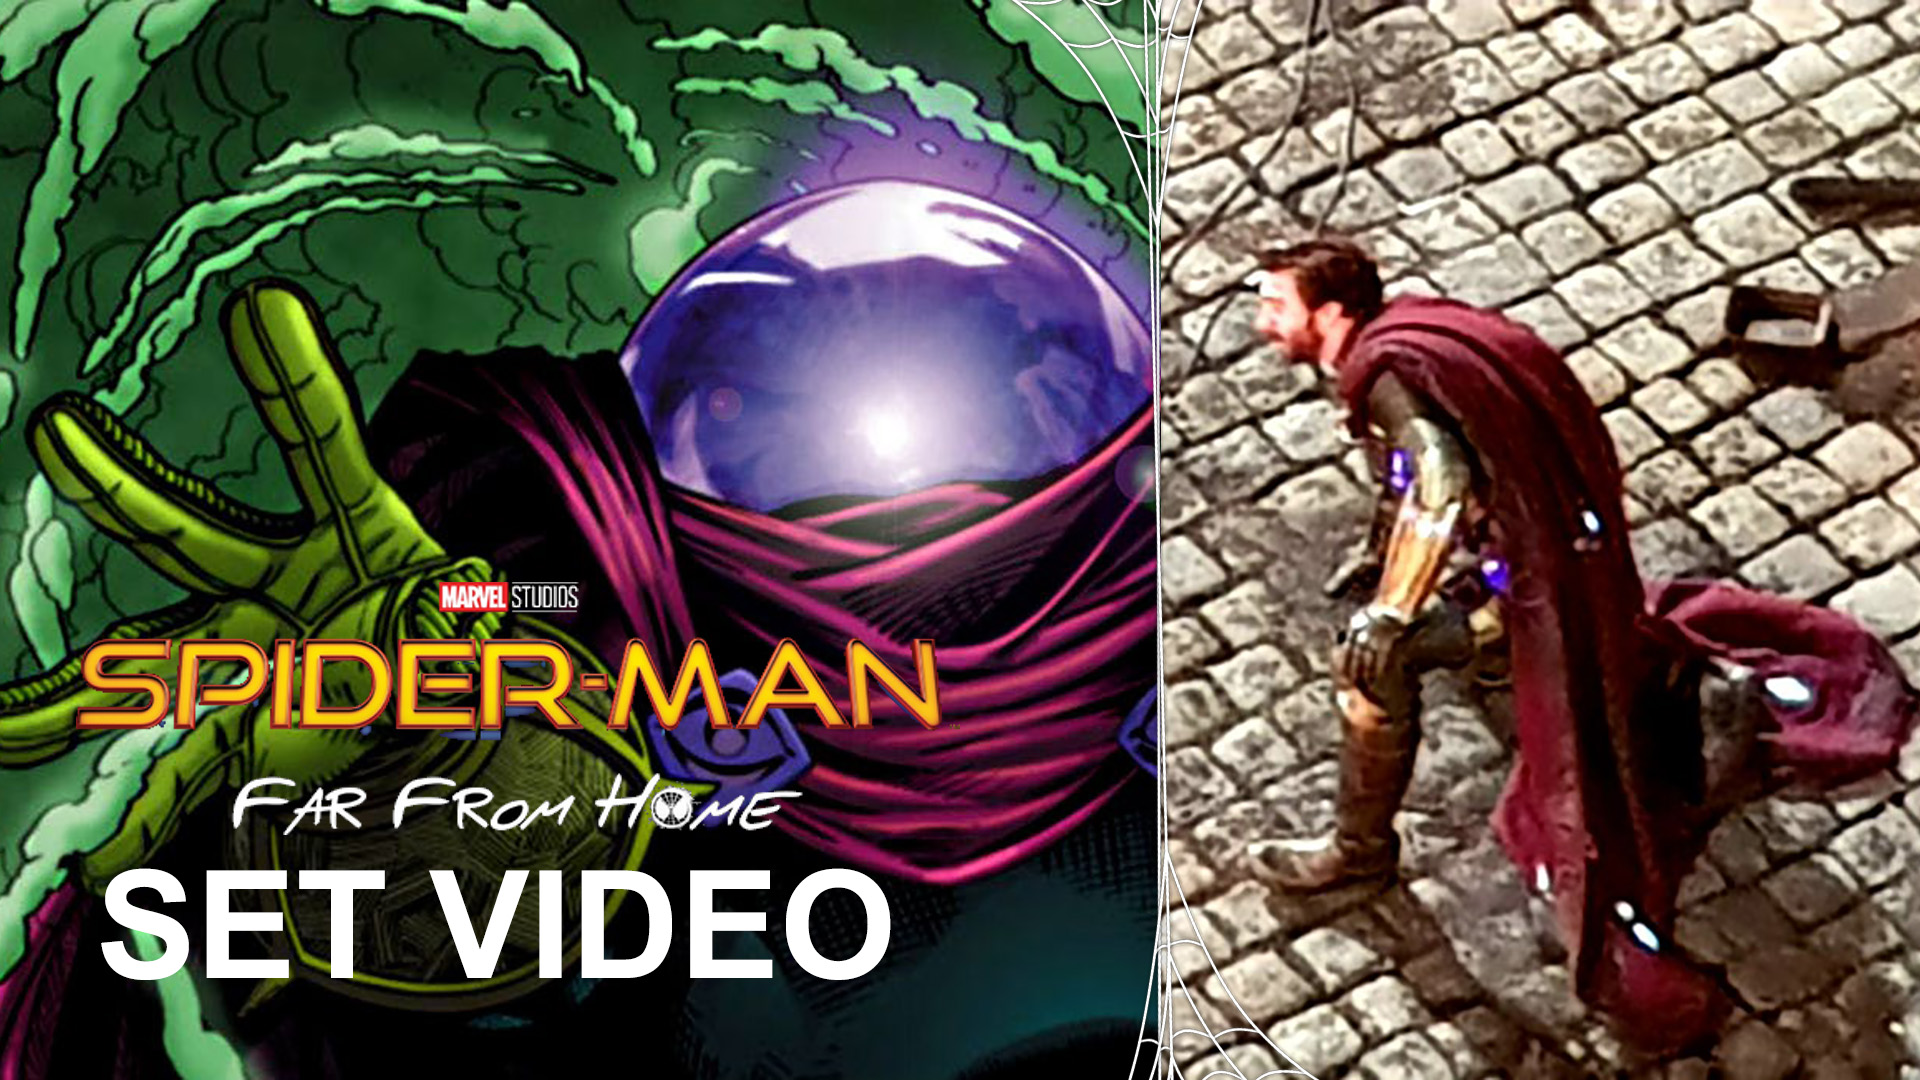 Spider-Man: Far From Home Set Video Jake Gyllenhaal as Mysterio